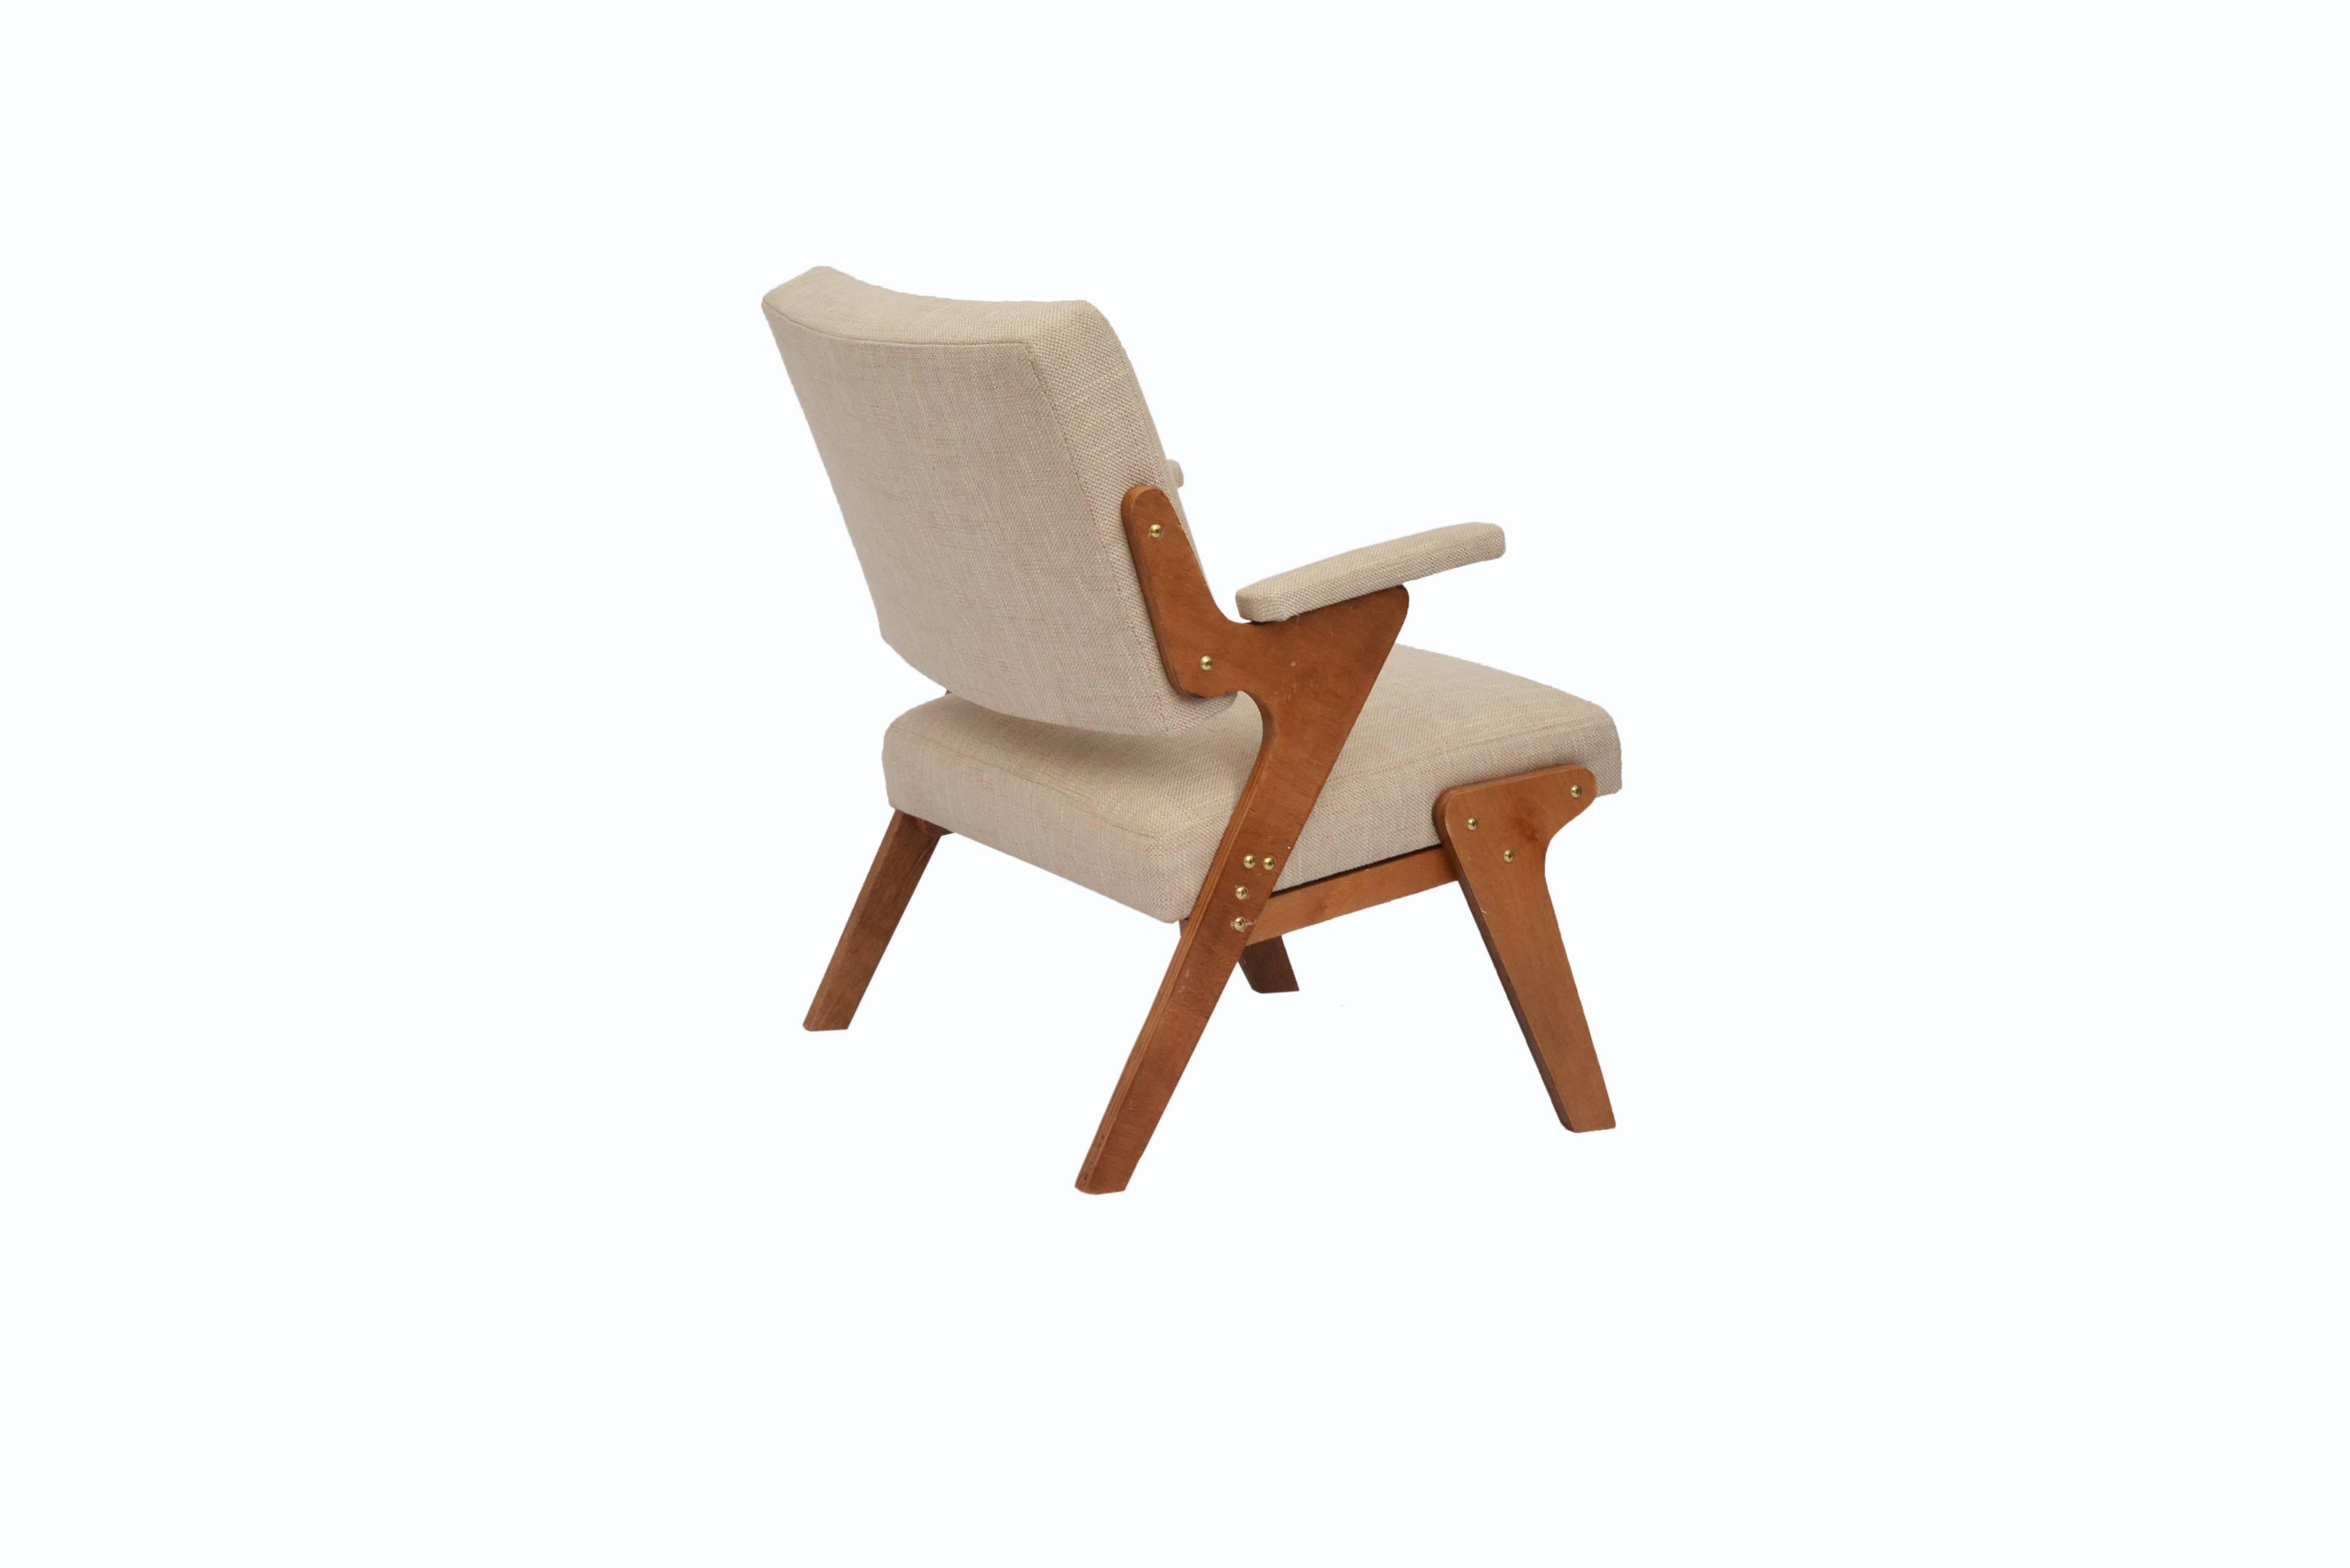 Pair of armchairs in marine plywood, upholstery in linen, manufactured by Moveis Artisticos Z.